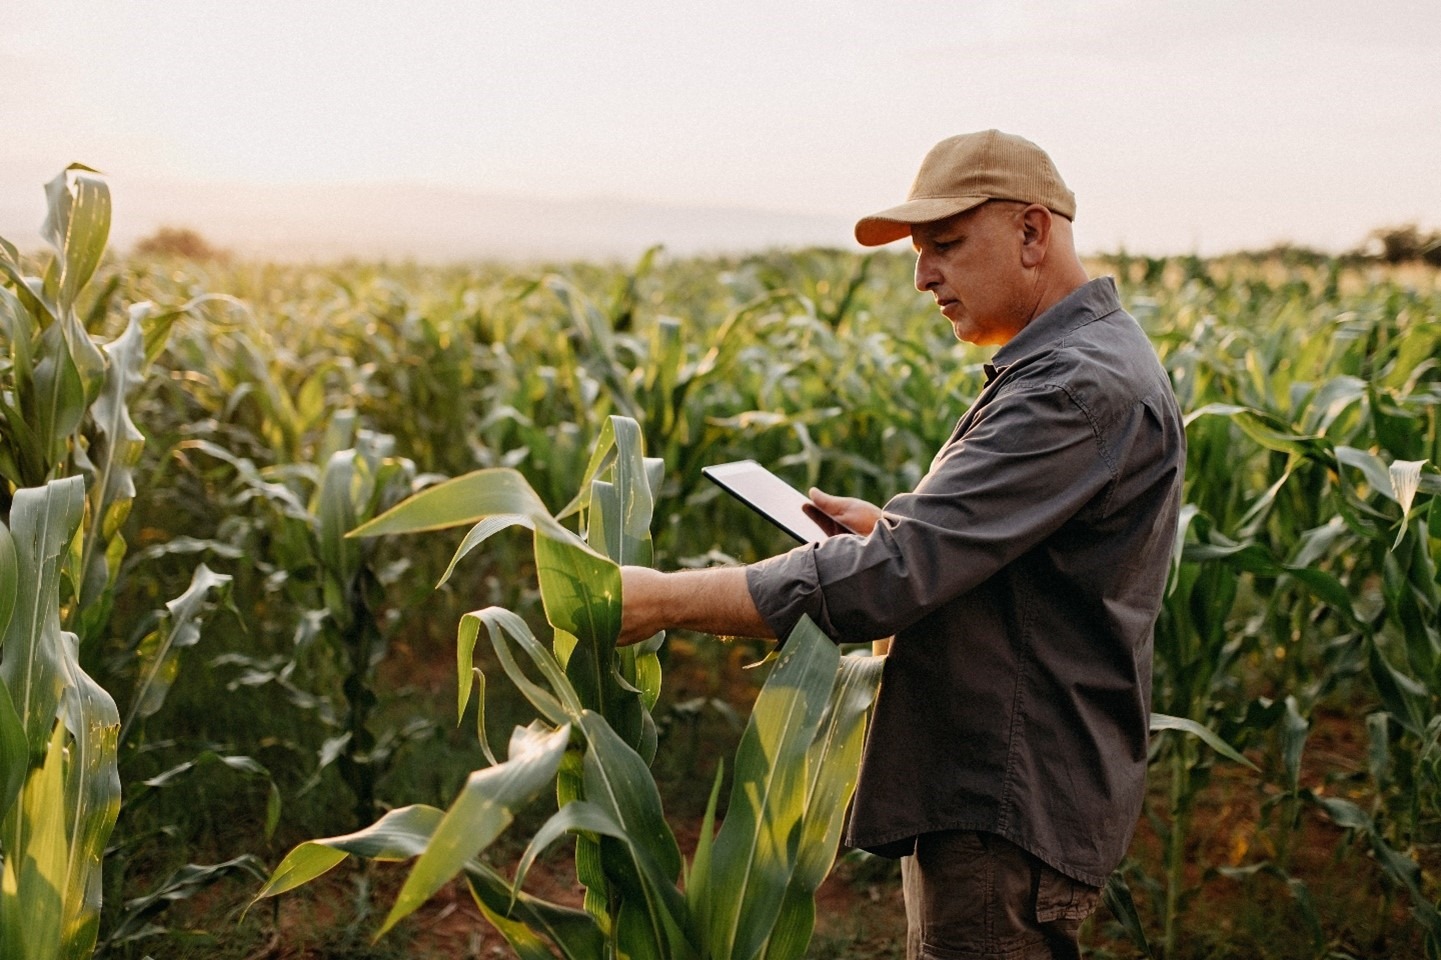 Announcing Microsoft Azure Data Manager for Agriculture: Accelerating Innovation Across the Entire Agricultural Value Chain